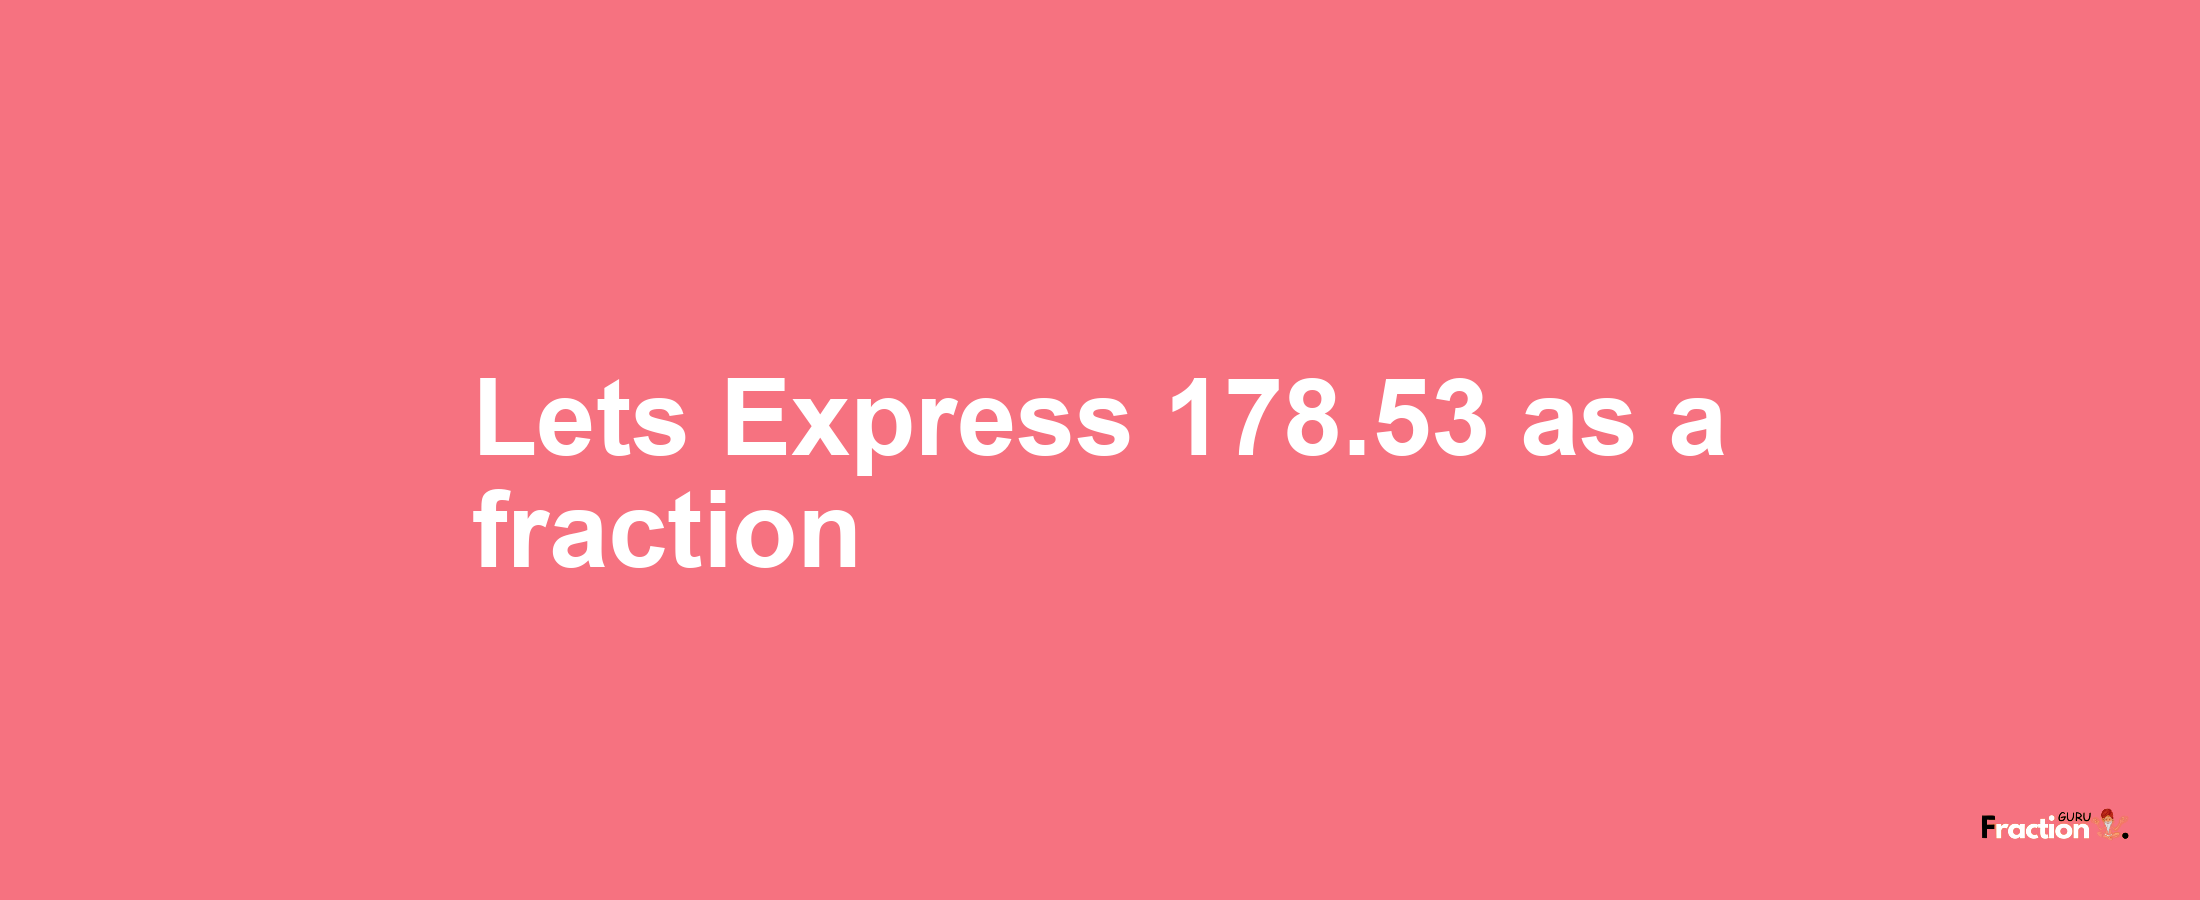 Lets Express 178.53 as afraction